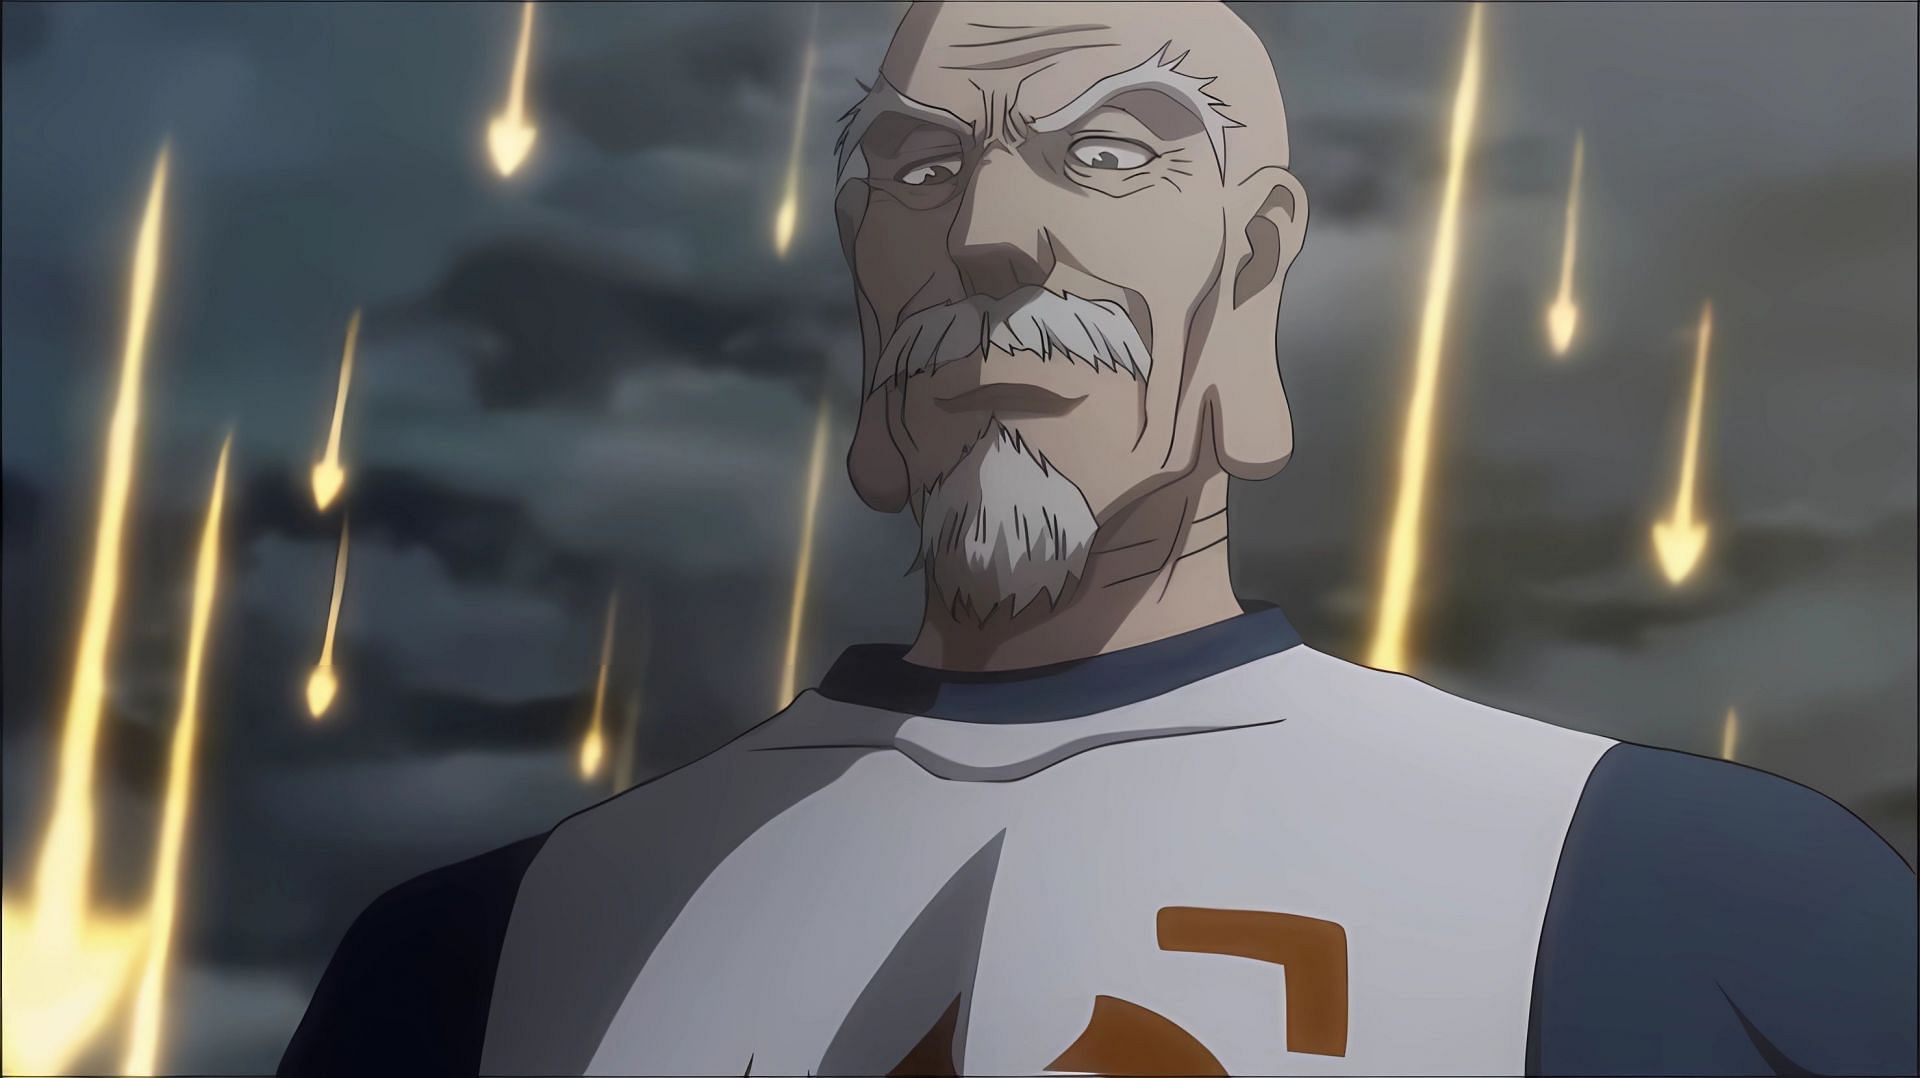 Isaac Netero as seen in the anime (Image via Madhouse)